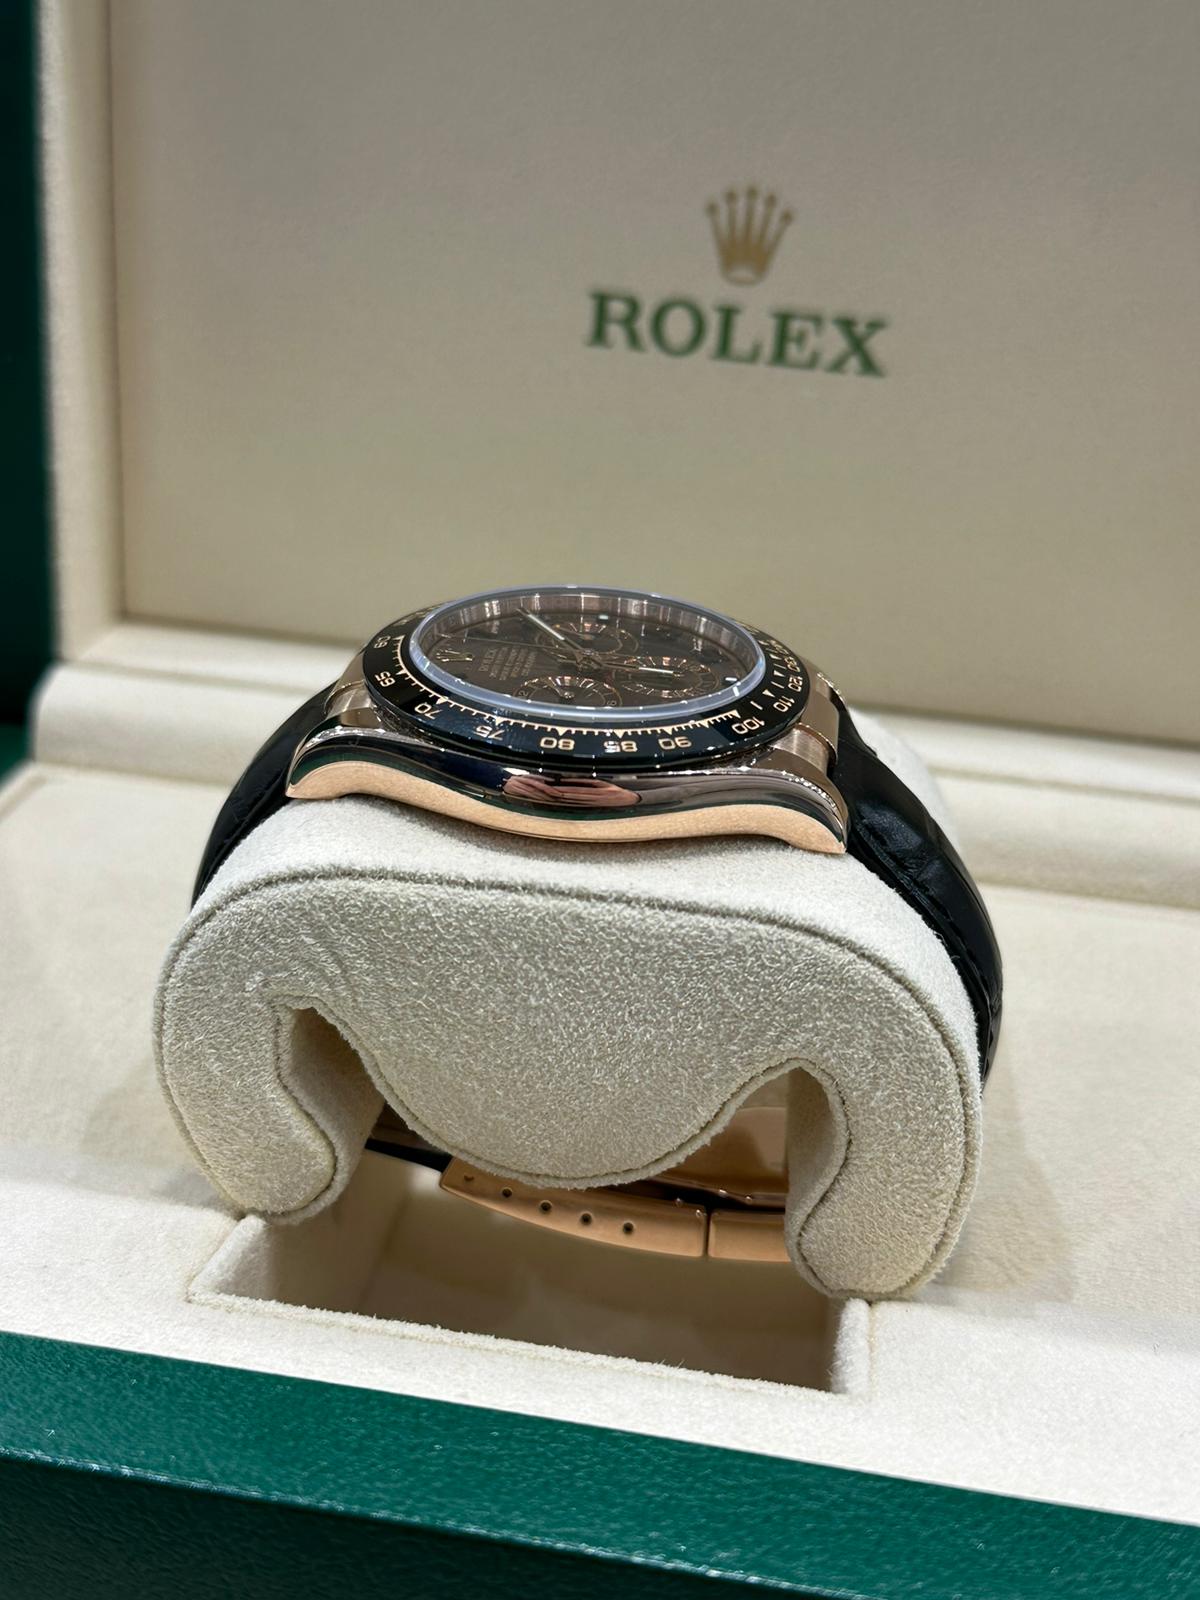 Rolex Daytona Chocolate with Leather bracelet 116515LN 2013 with box and papers. - Image 2 of 8